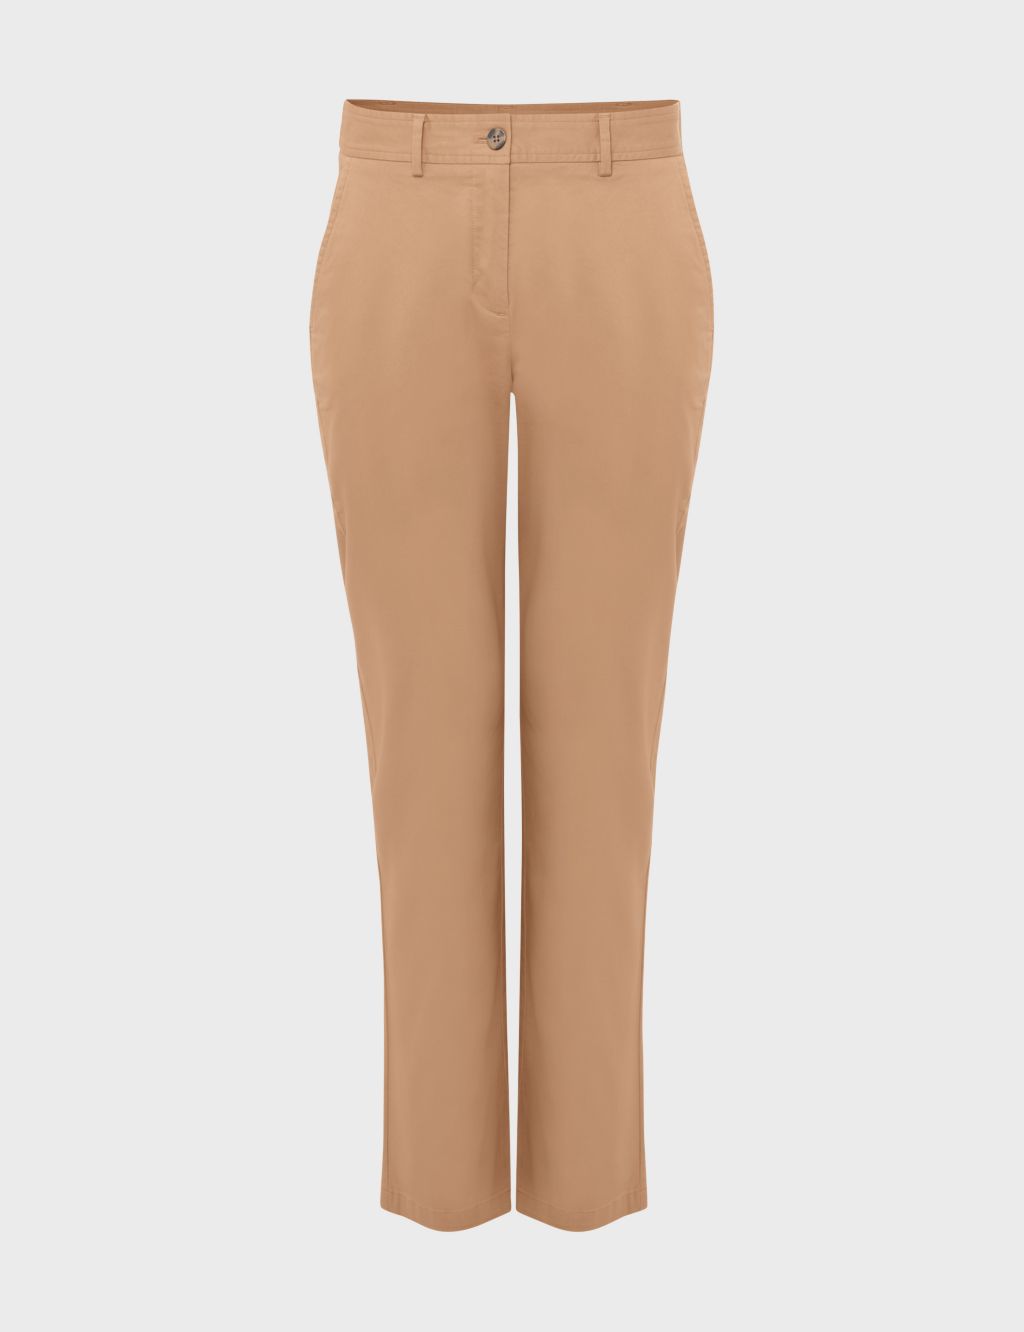 Cotton Rich Chinos image 2